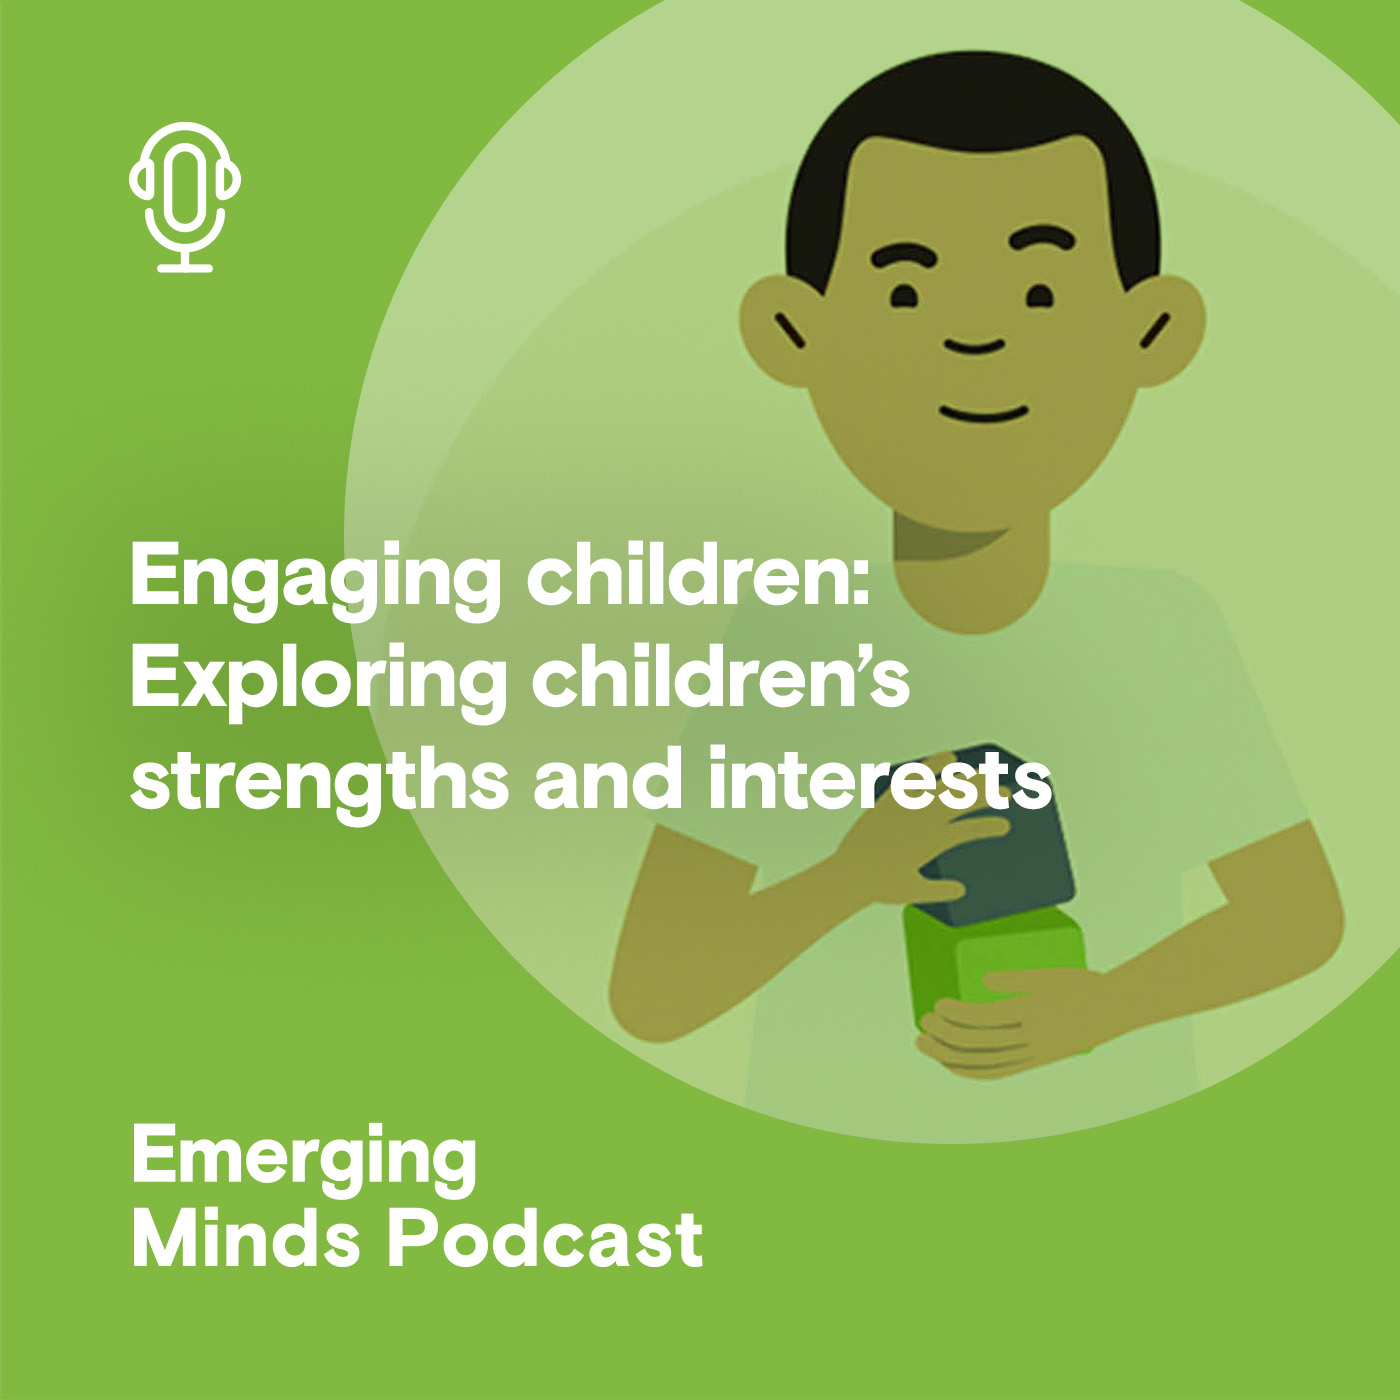 Engaging children: Exploring children's strengths and interests